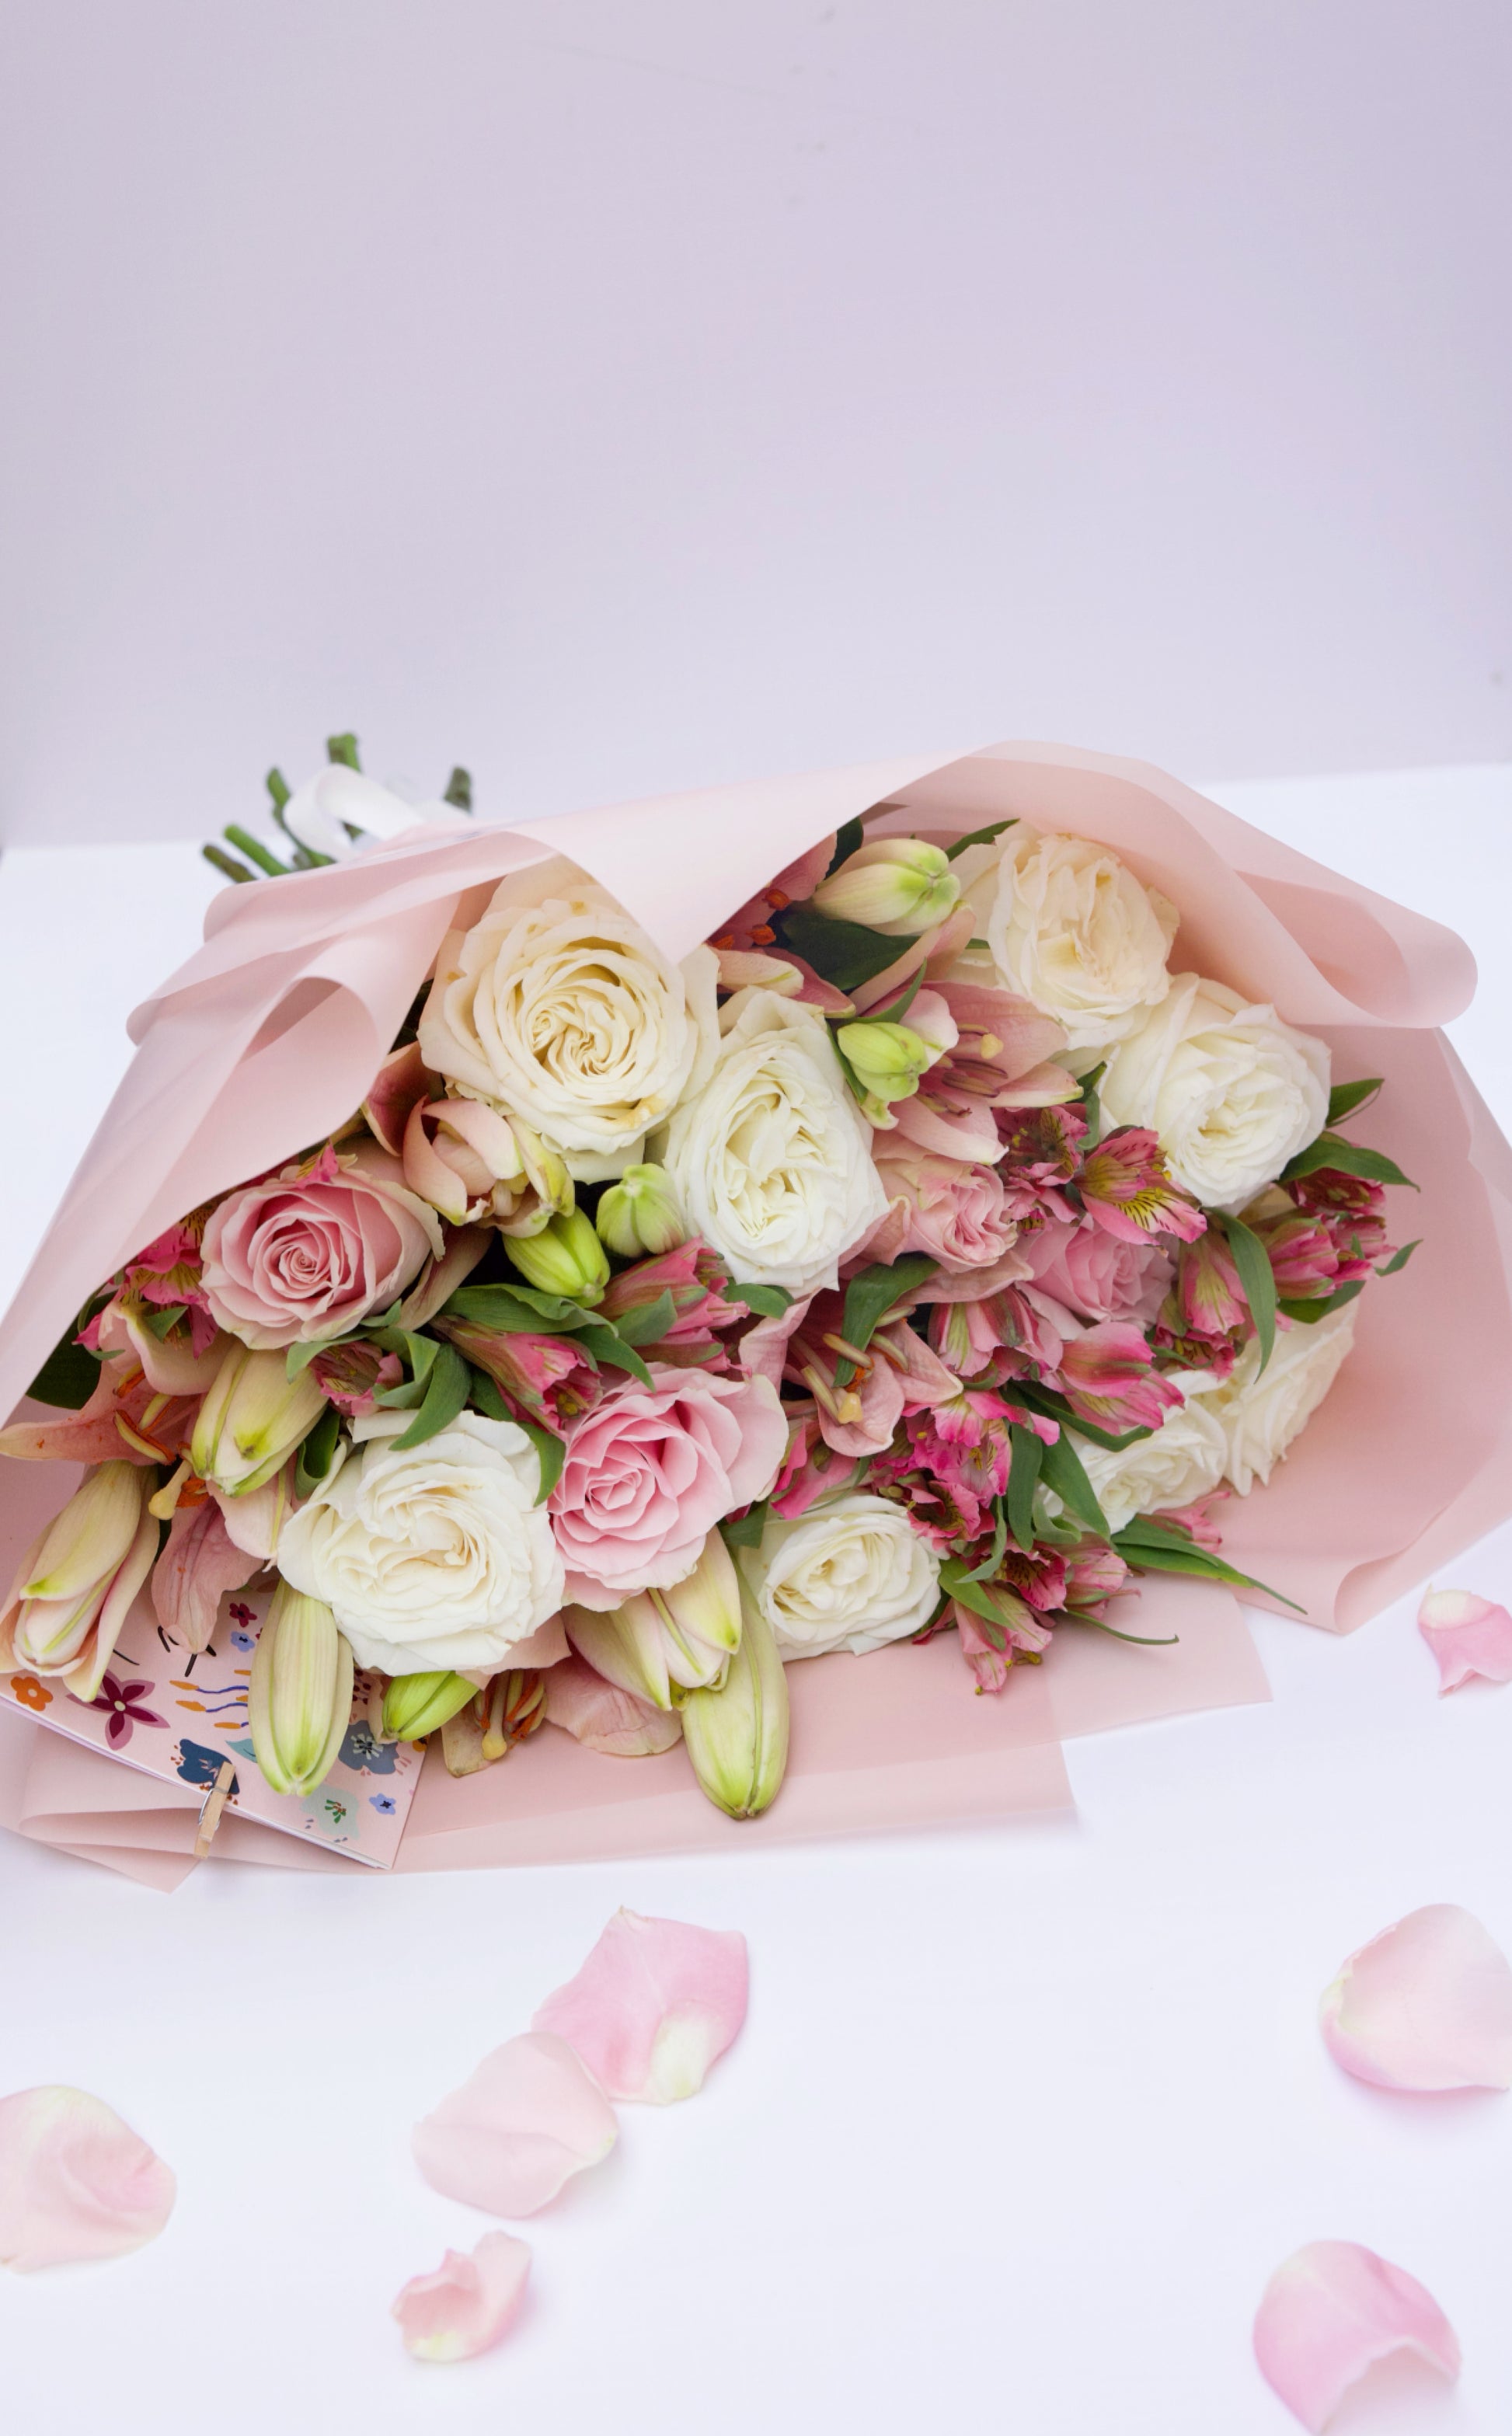 Enchant your loved ones with our Roses and Seasonal Flowers bouquet. This captivating arrangement blends classic roses with the freshest seasonal blooms, creating a vibrant and stunning display. Order now to brighten someone's day with this beautiful bouquet!